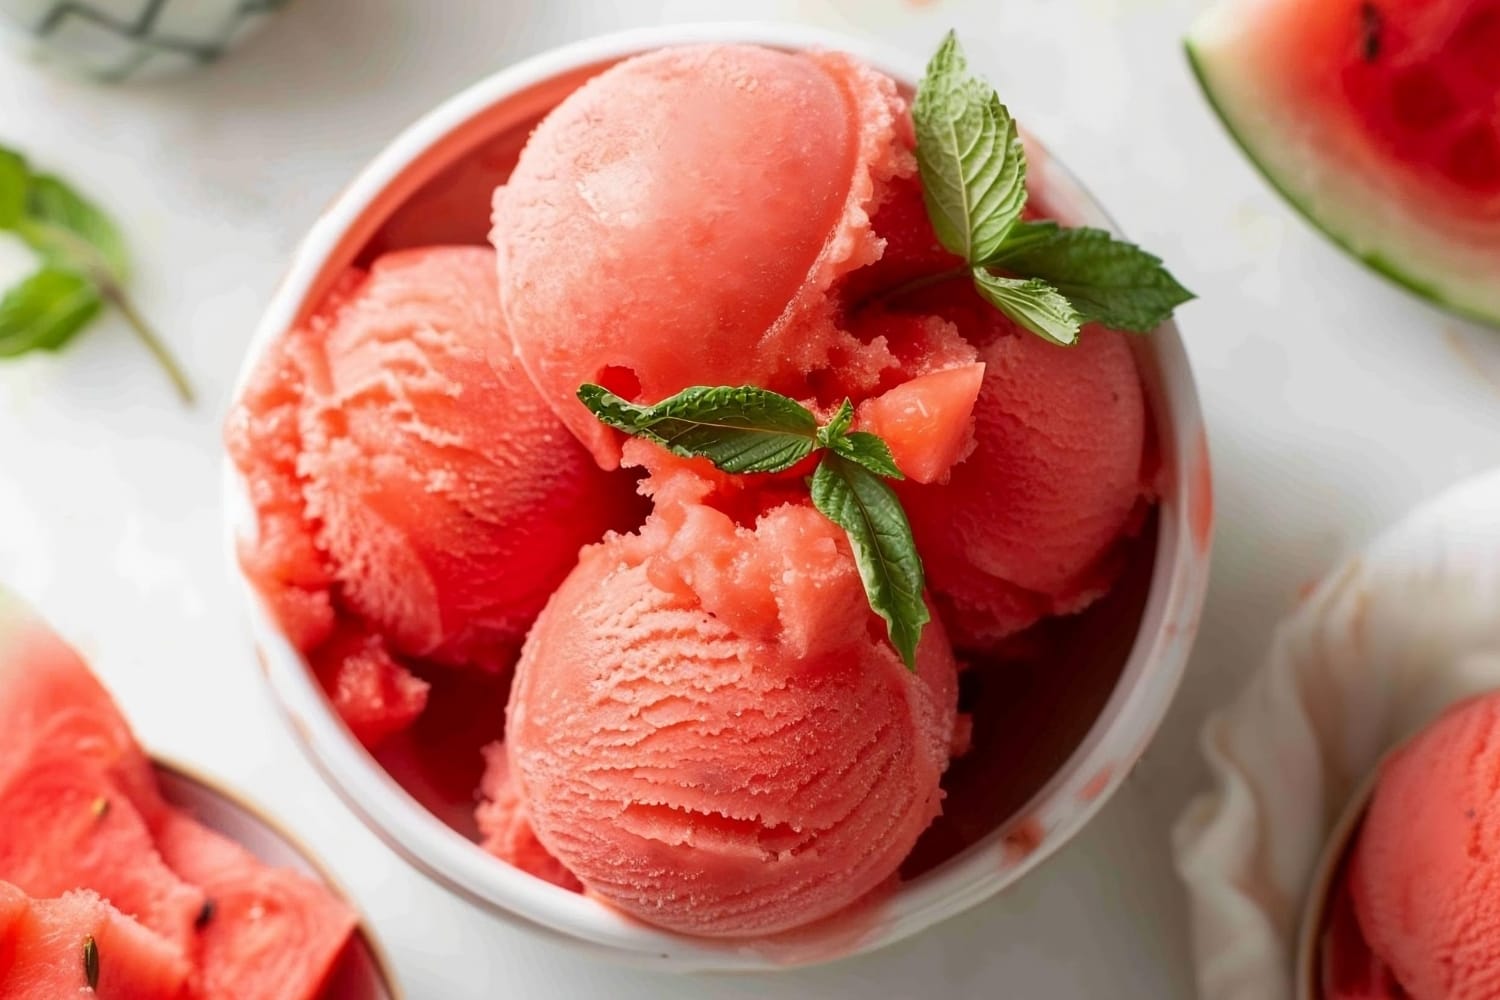 A bowl of homemade watermelon sorbet with a hint of mint